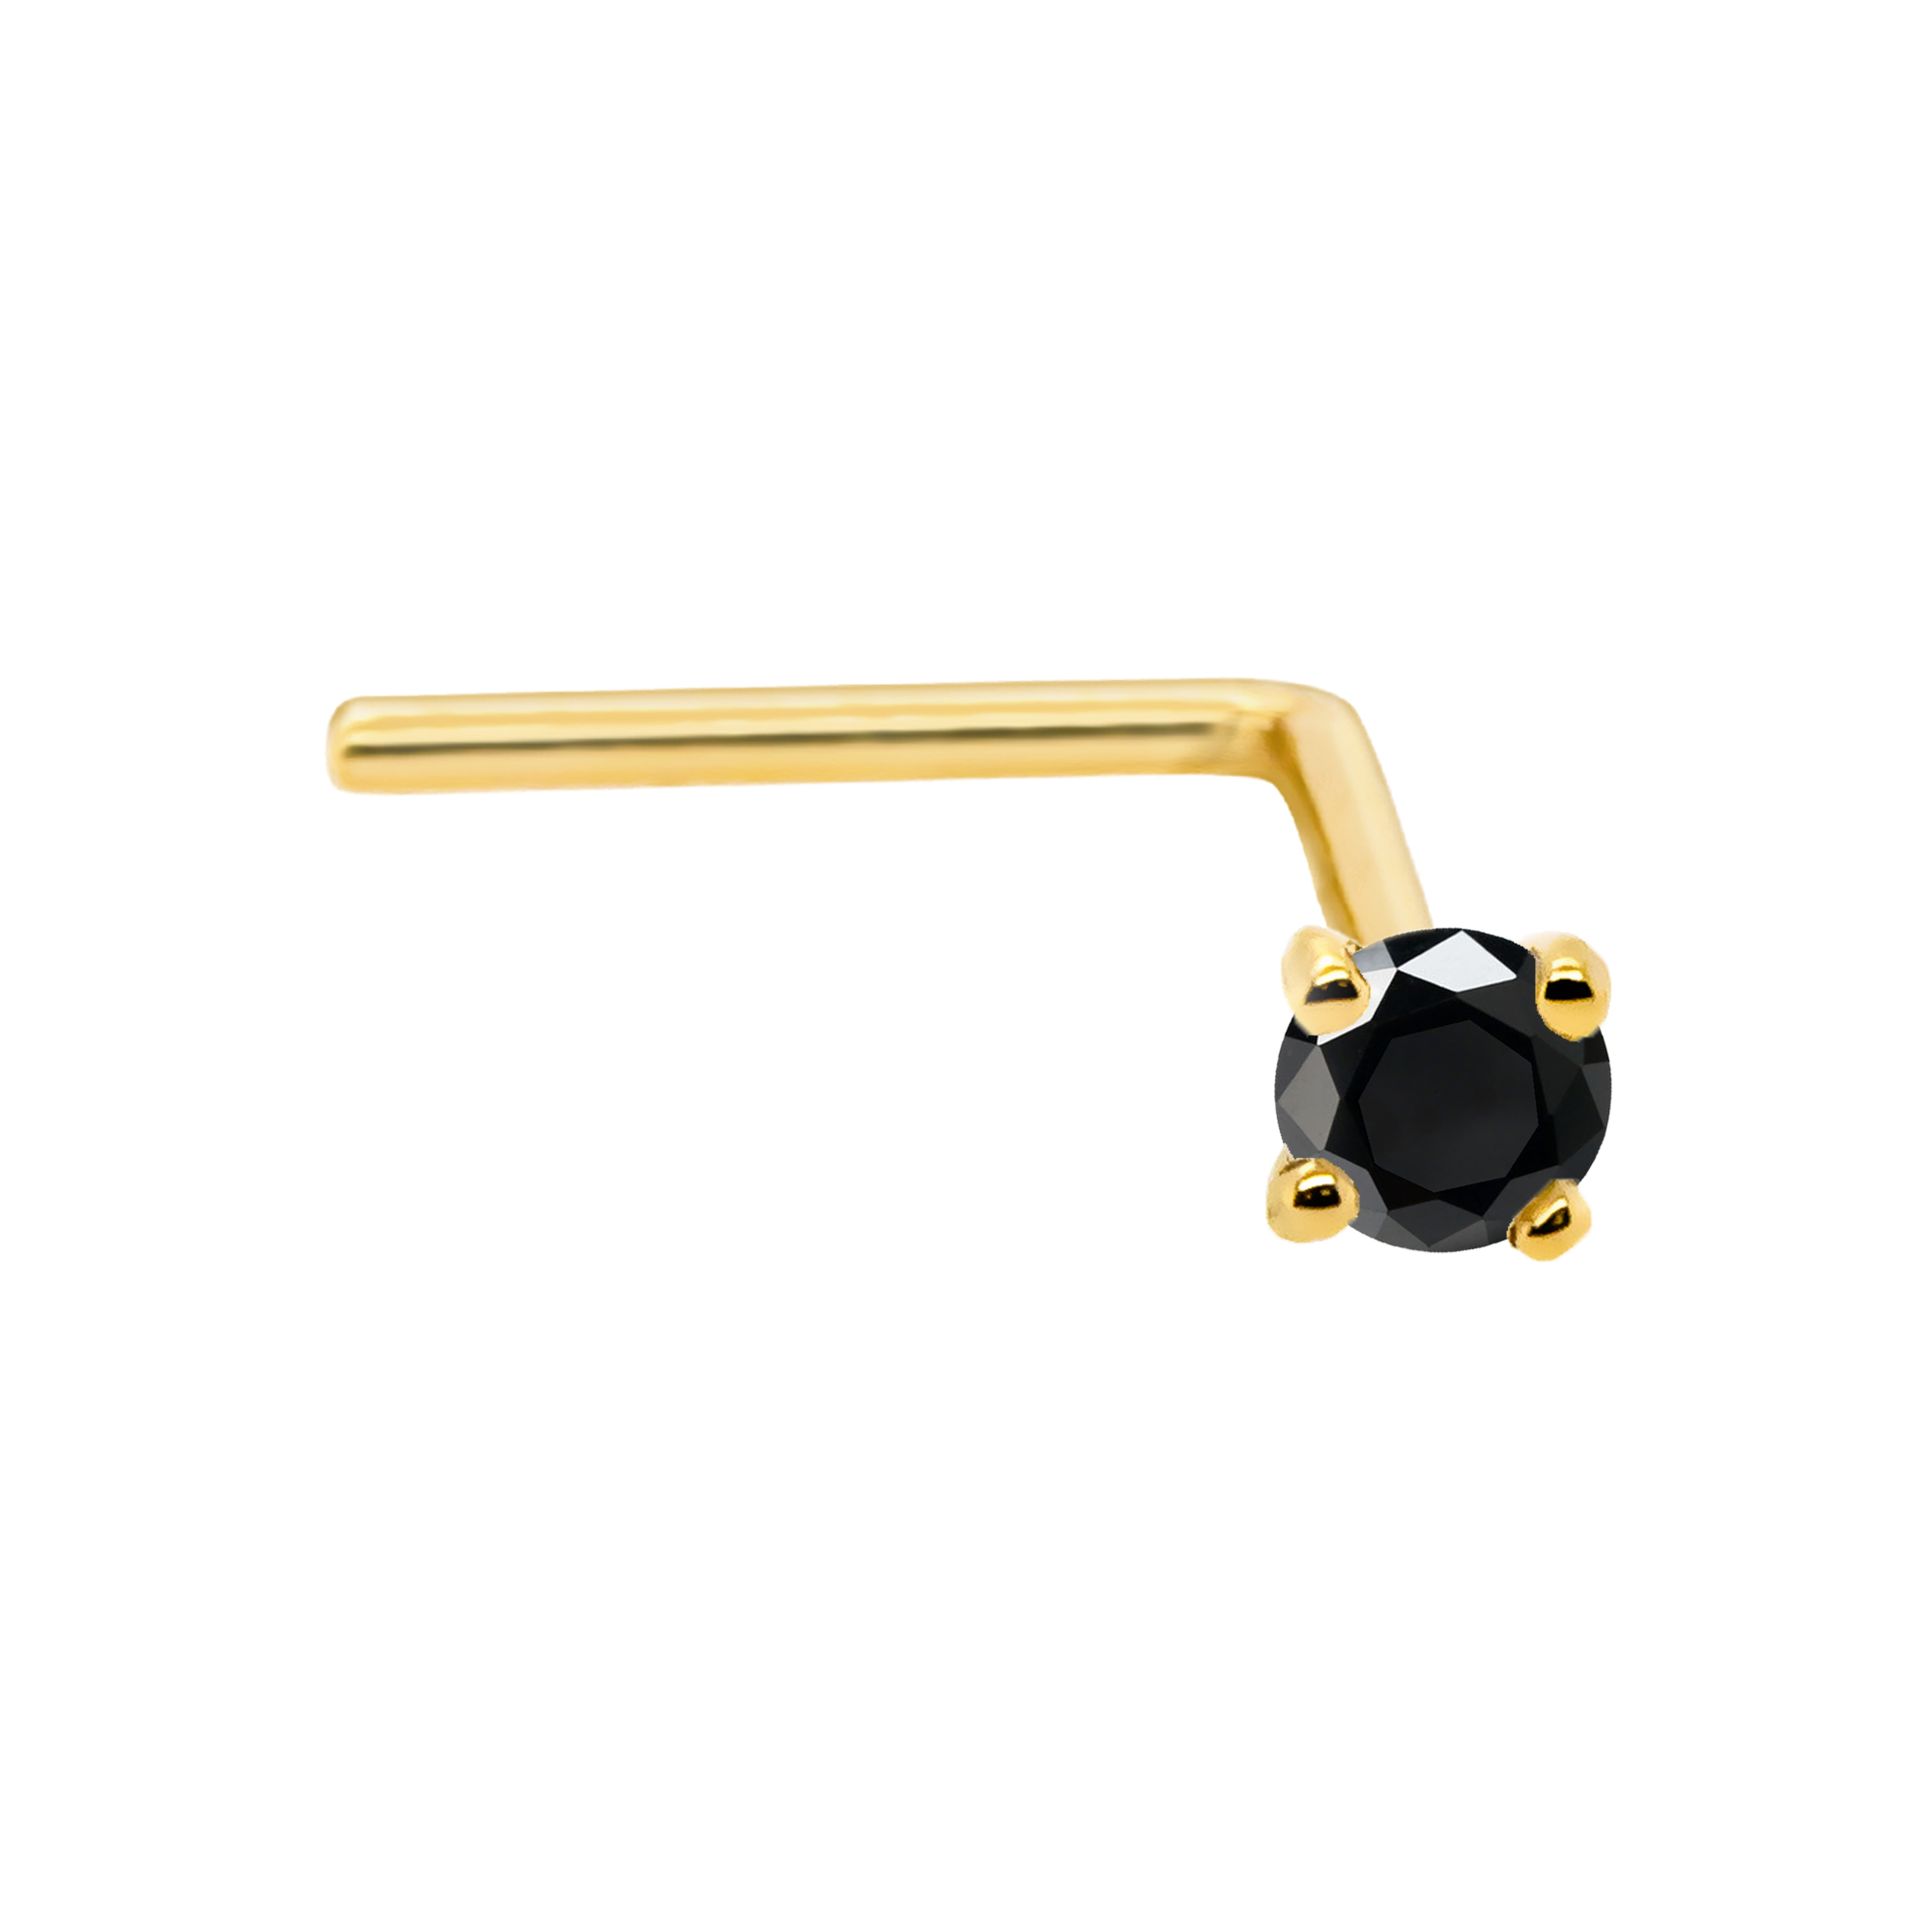 22G Solid 14Kt Gold L-Shape Nose Stud with real Black Diamond Gemstone, 14kt Yellow Gold or 14kt White Gold Prong Setting - April Birthstone Nose Ring